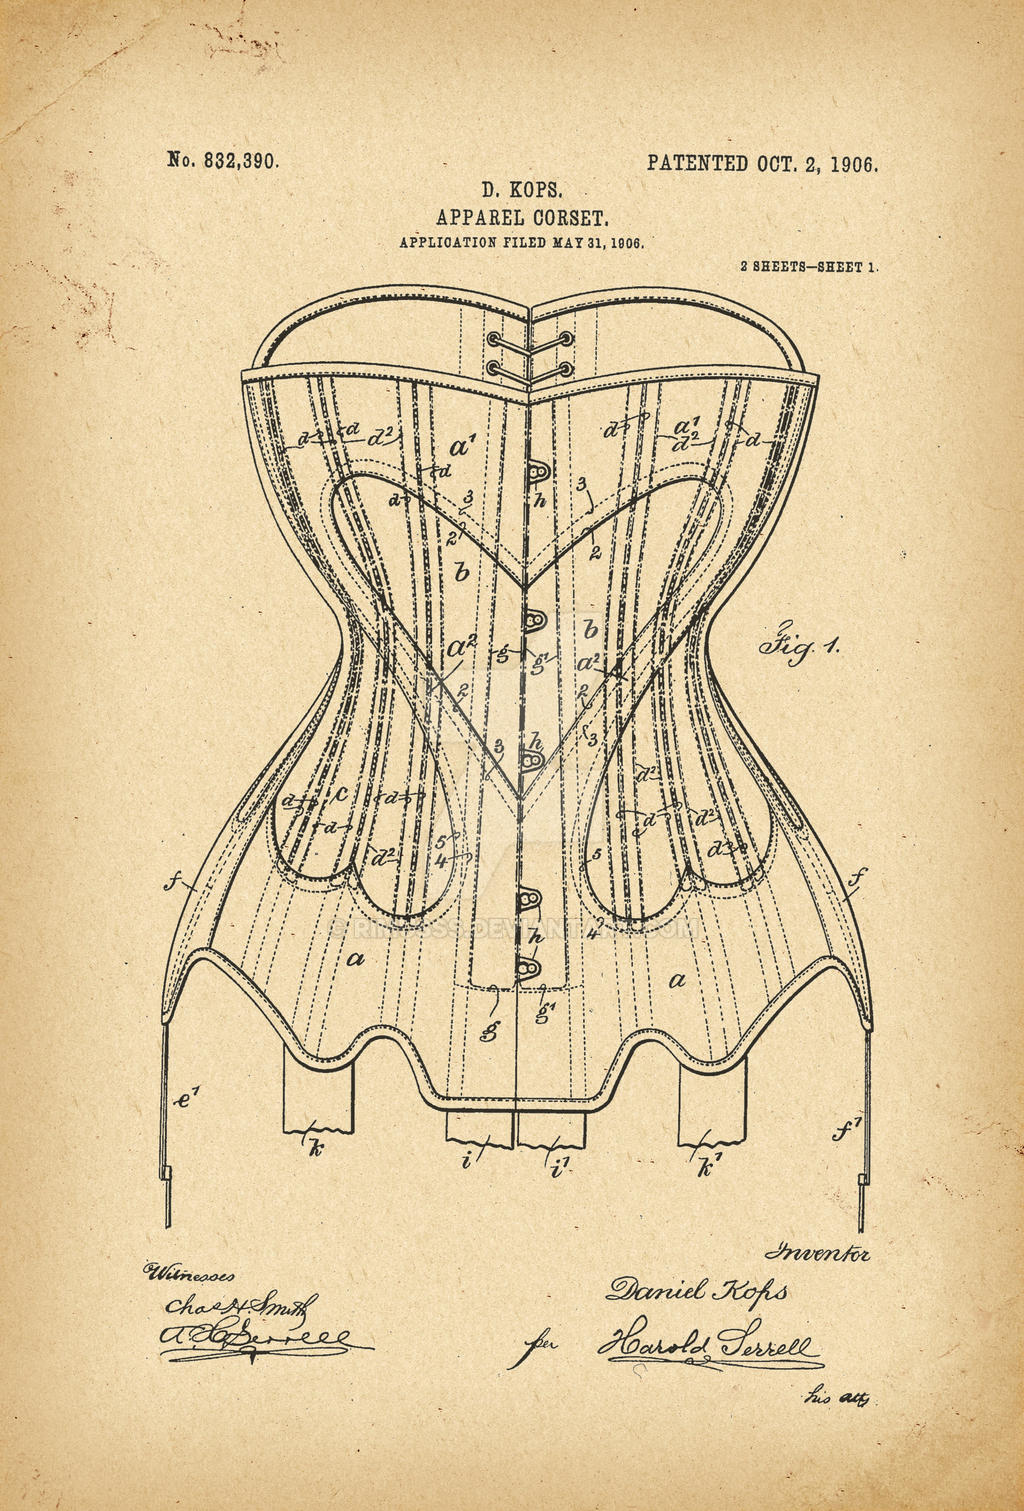 Category: 1906 S-Bend Corset - 'History House' Antique Patterns by the  Fashion Archaeologist